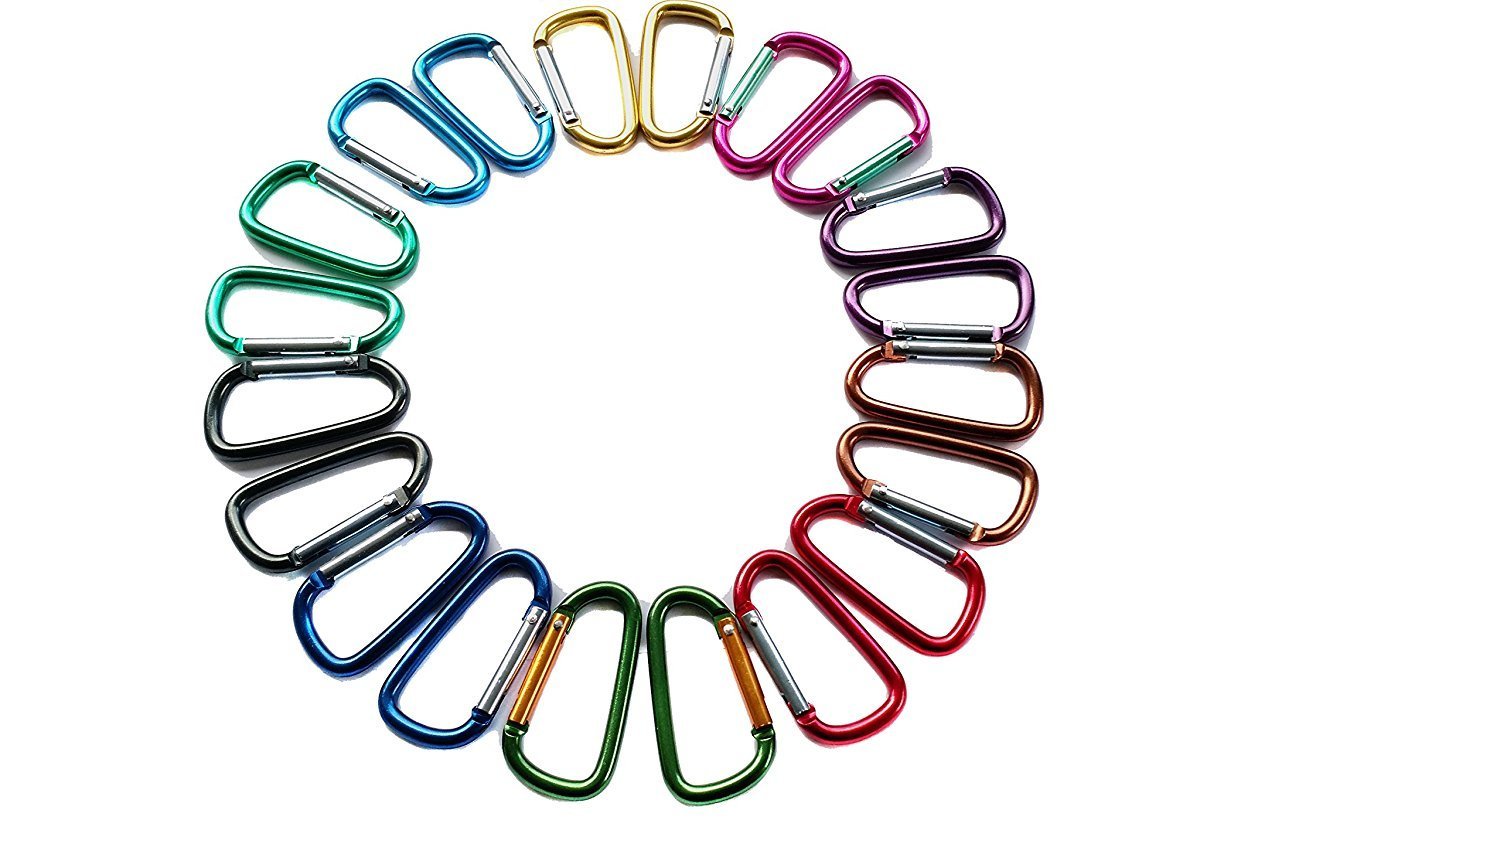 20 Pack 2/5cm Carabiner Multi-color D Shape for Home, RV, Camping, Fishing, Hiking